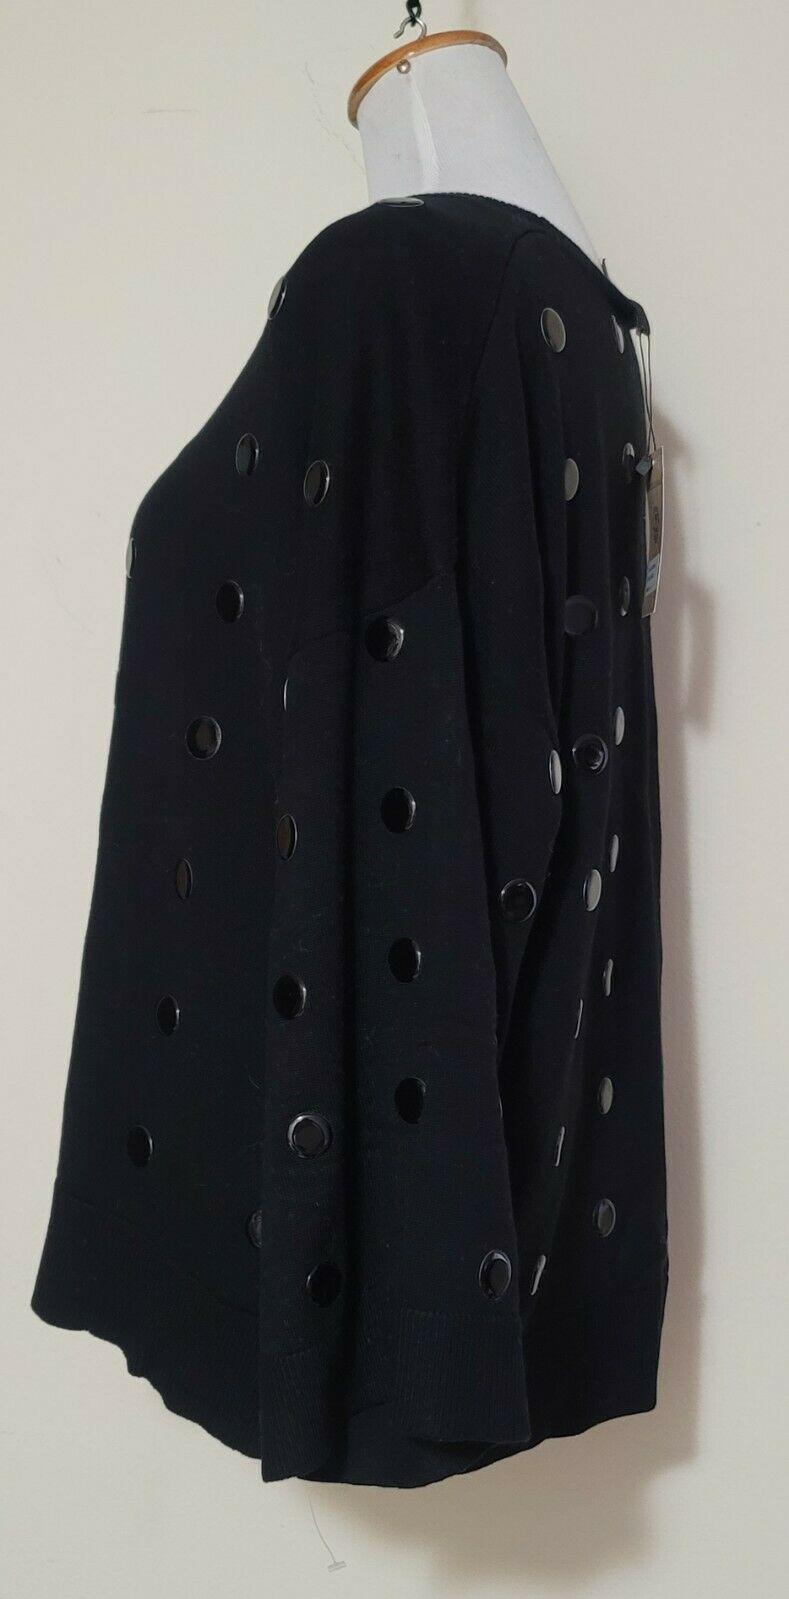 Vecceli Italy Womens Black Top Pullover With Polka Dot and Wide Sleeve Size M - SVNYFancy